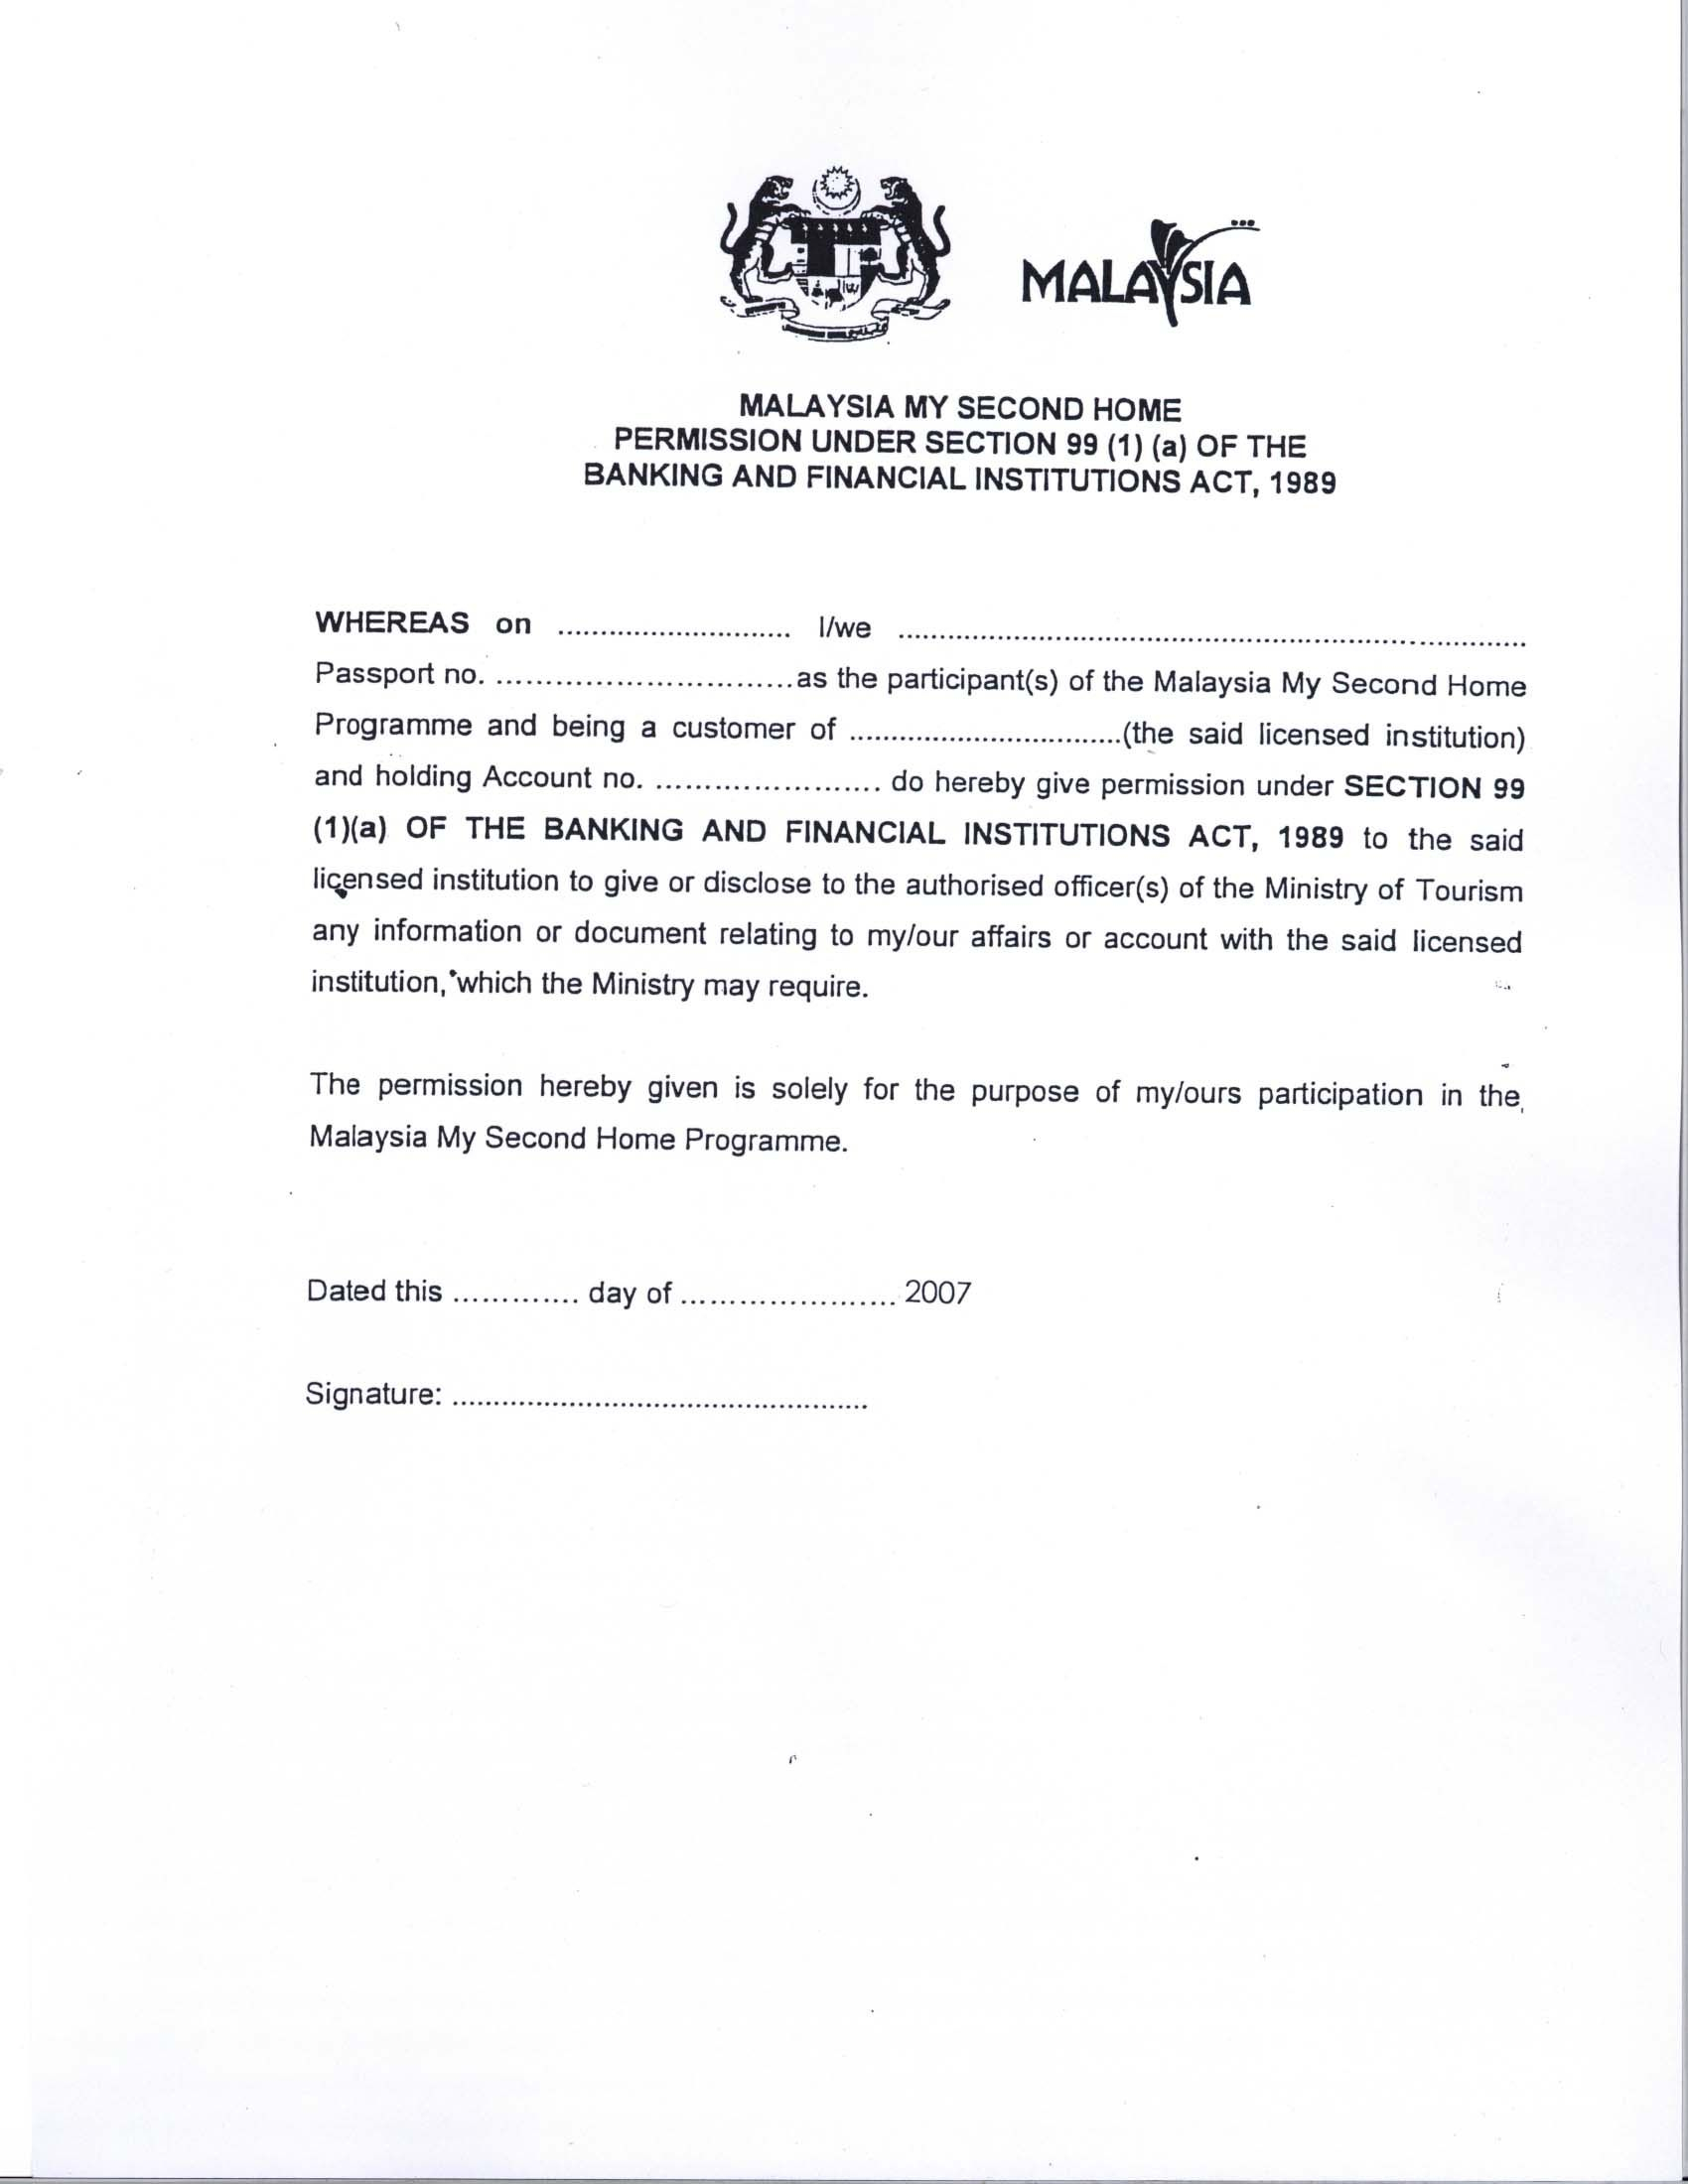 Grant Request Letter Template - Malaysia Visa Application Letter Writing A Re Papervisa Request